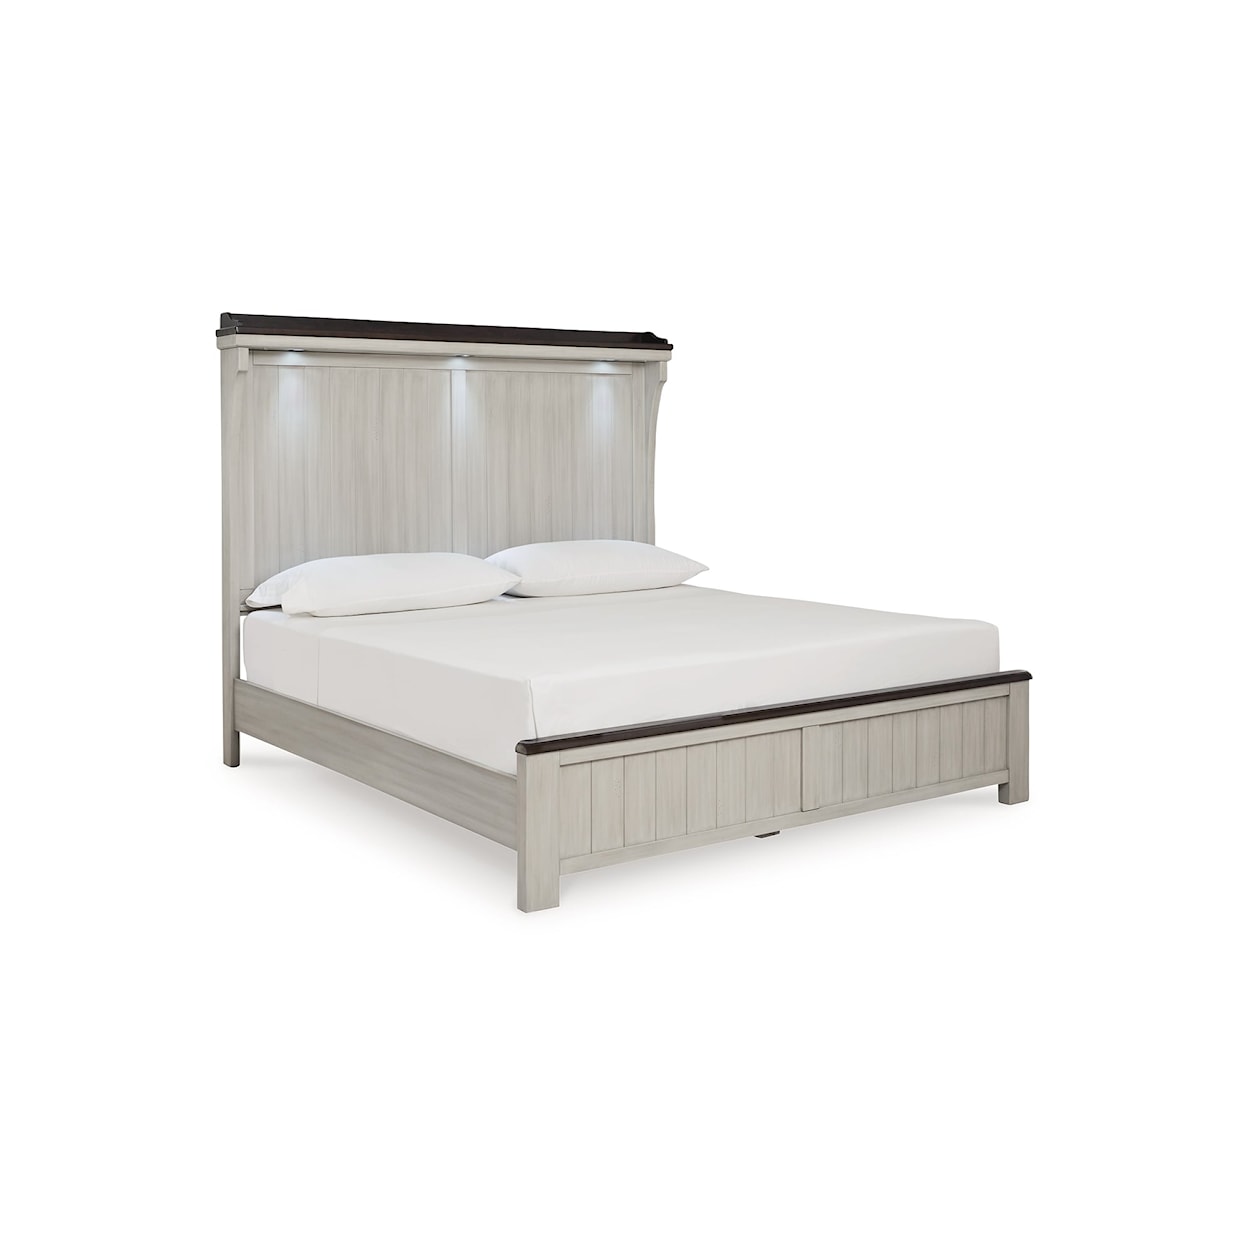 Benchcraft Darborn King Panel Bed